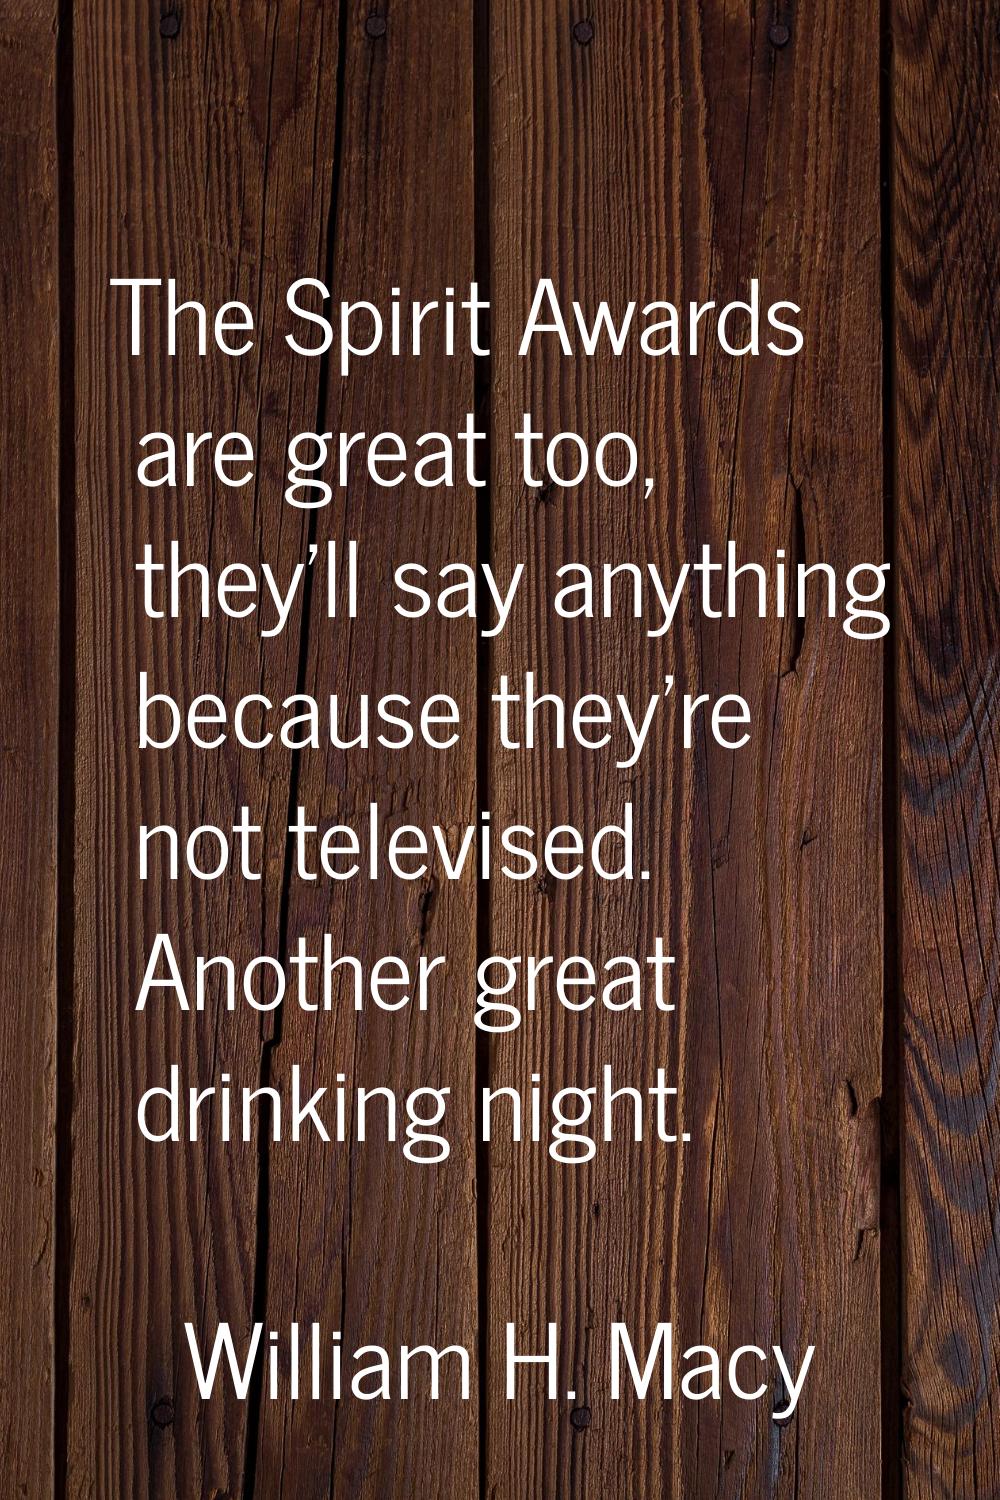 The Spirit Awards are great too, they'll say anything because they're not televised. Another great 